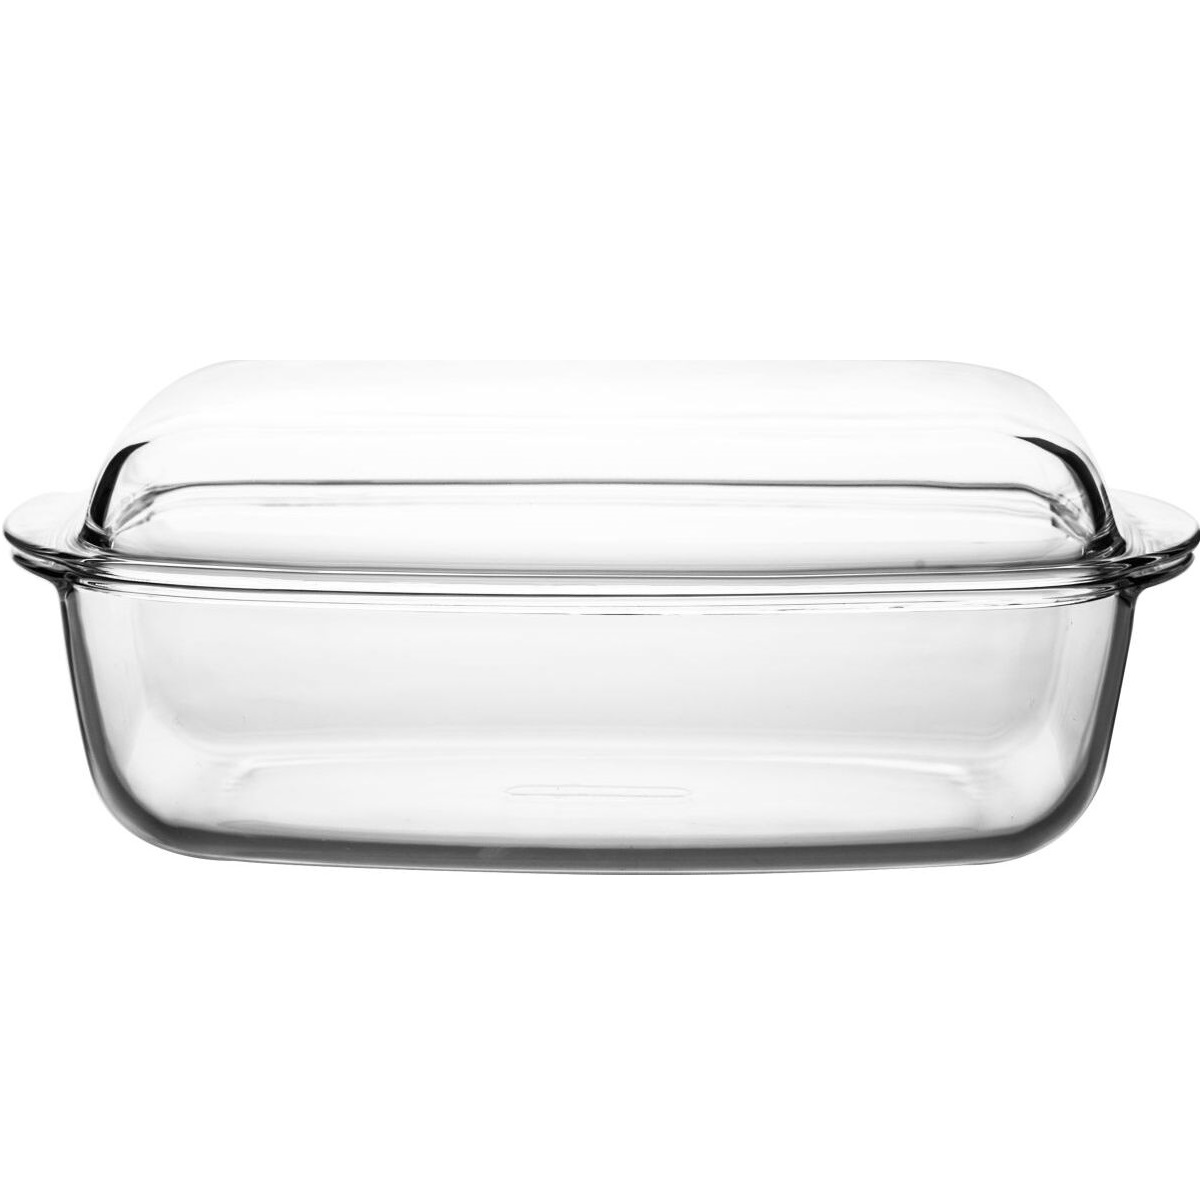 Утятница Pyrex 6,5л, 466AA утятница pyrex 4л 459aa